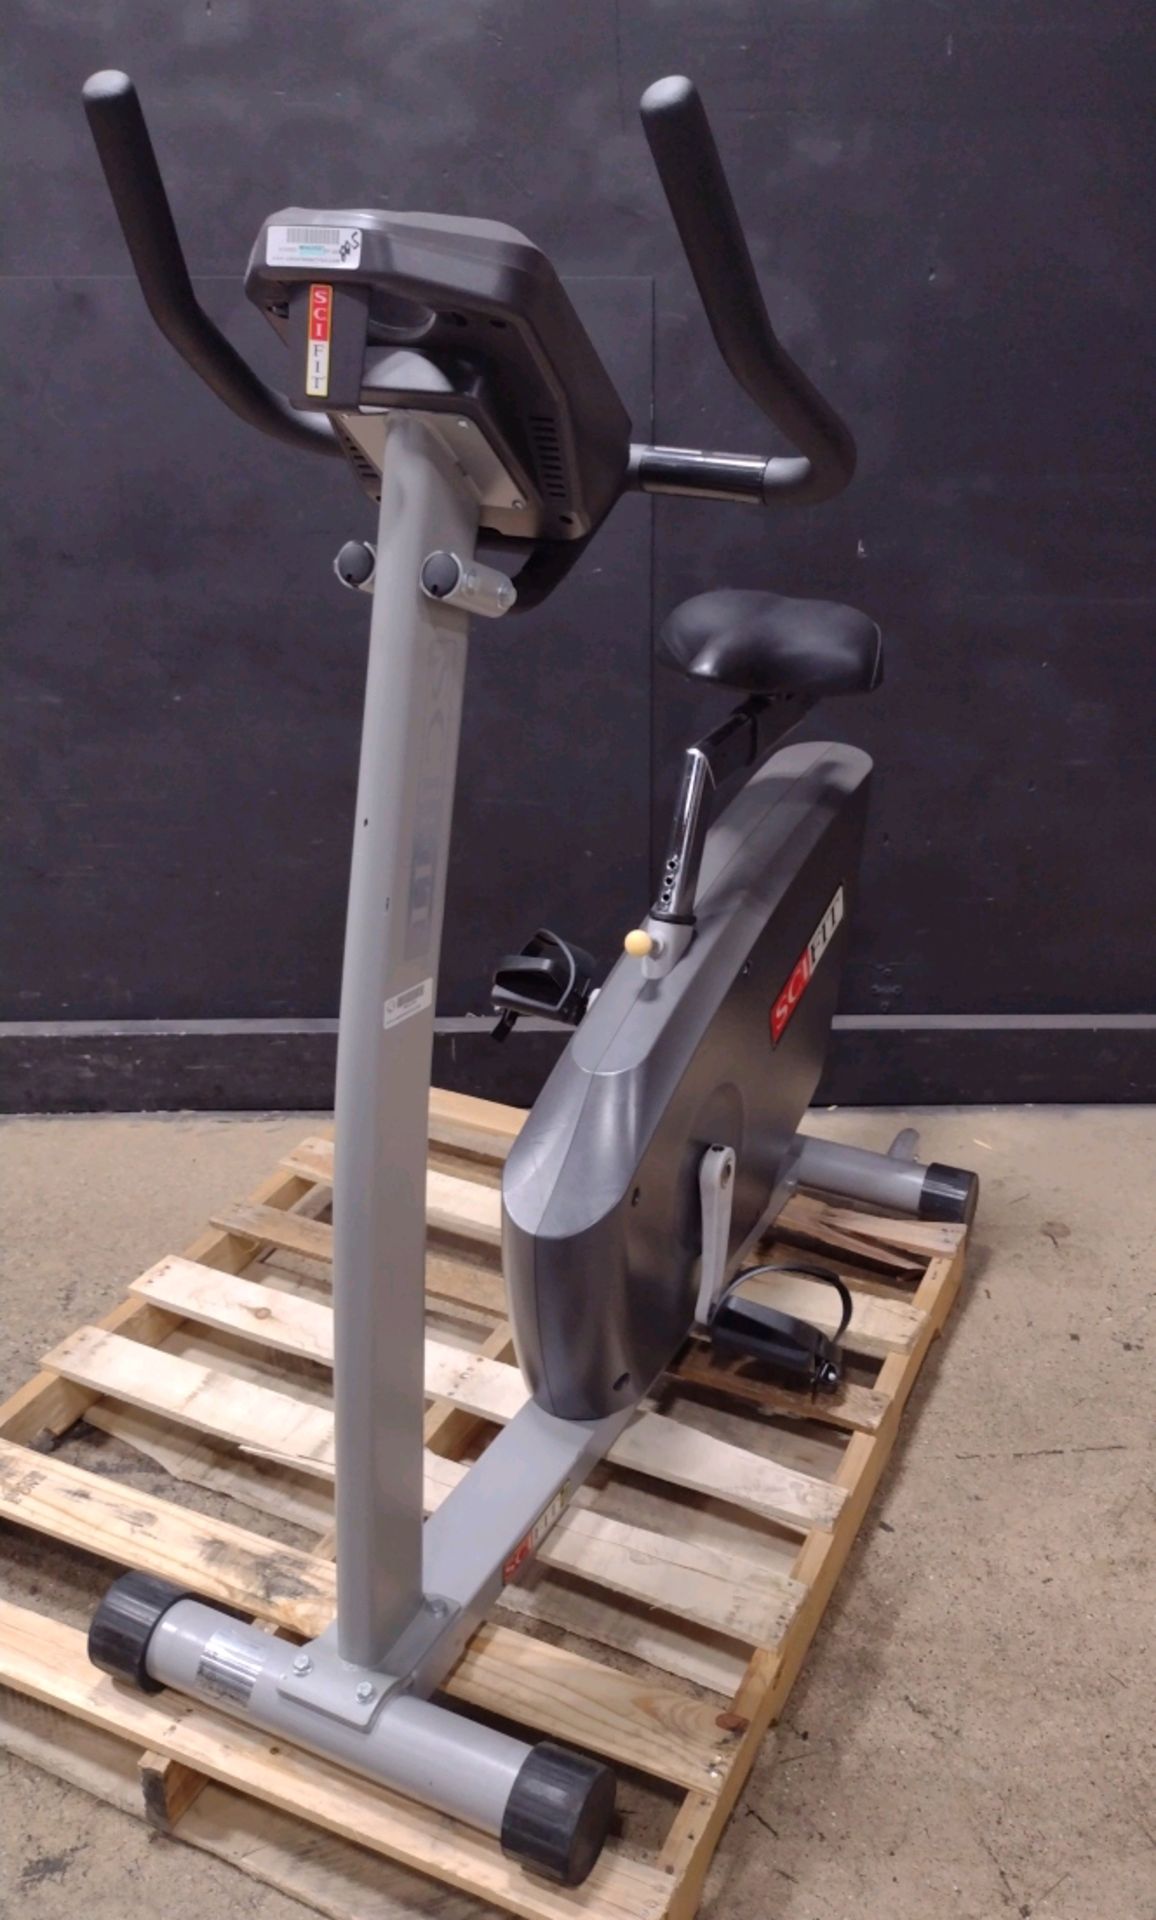 SCIFIT ISO 7000 EXERCISE BIKE (LOCATED AT 3325 MOUNT PROSPECT ROAD, FRANKLIN PARK, IL, 60131)